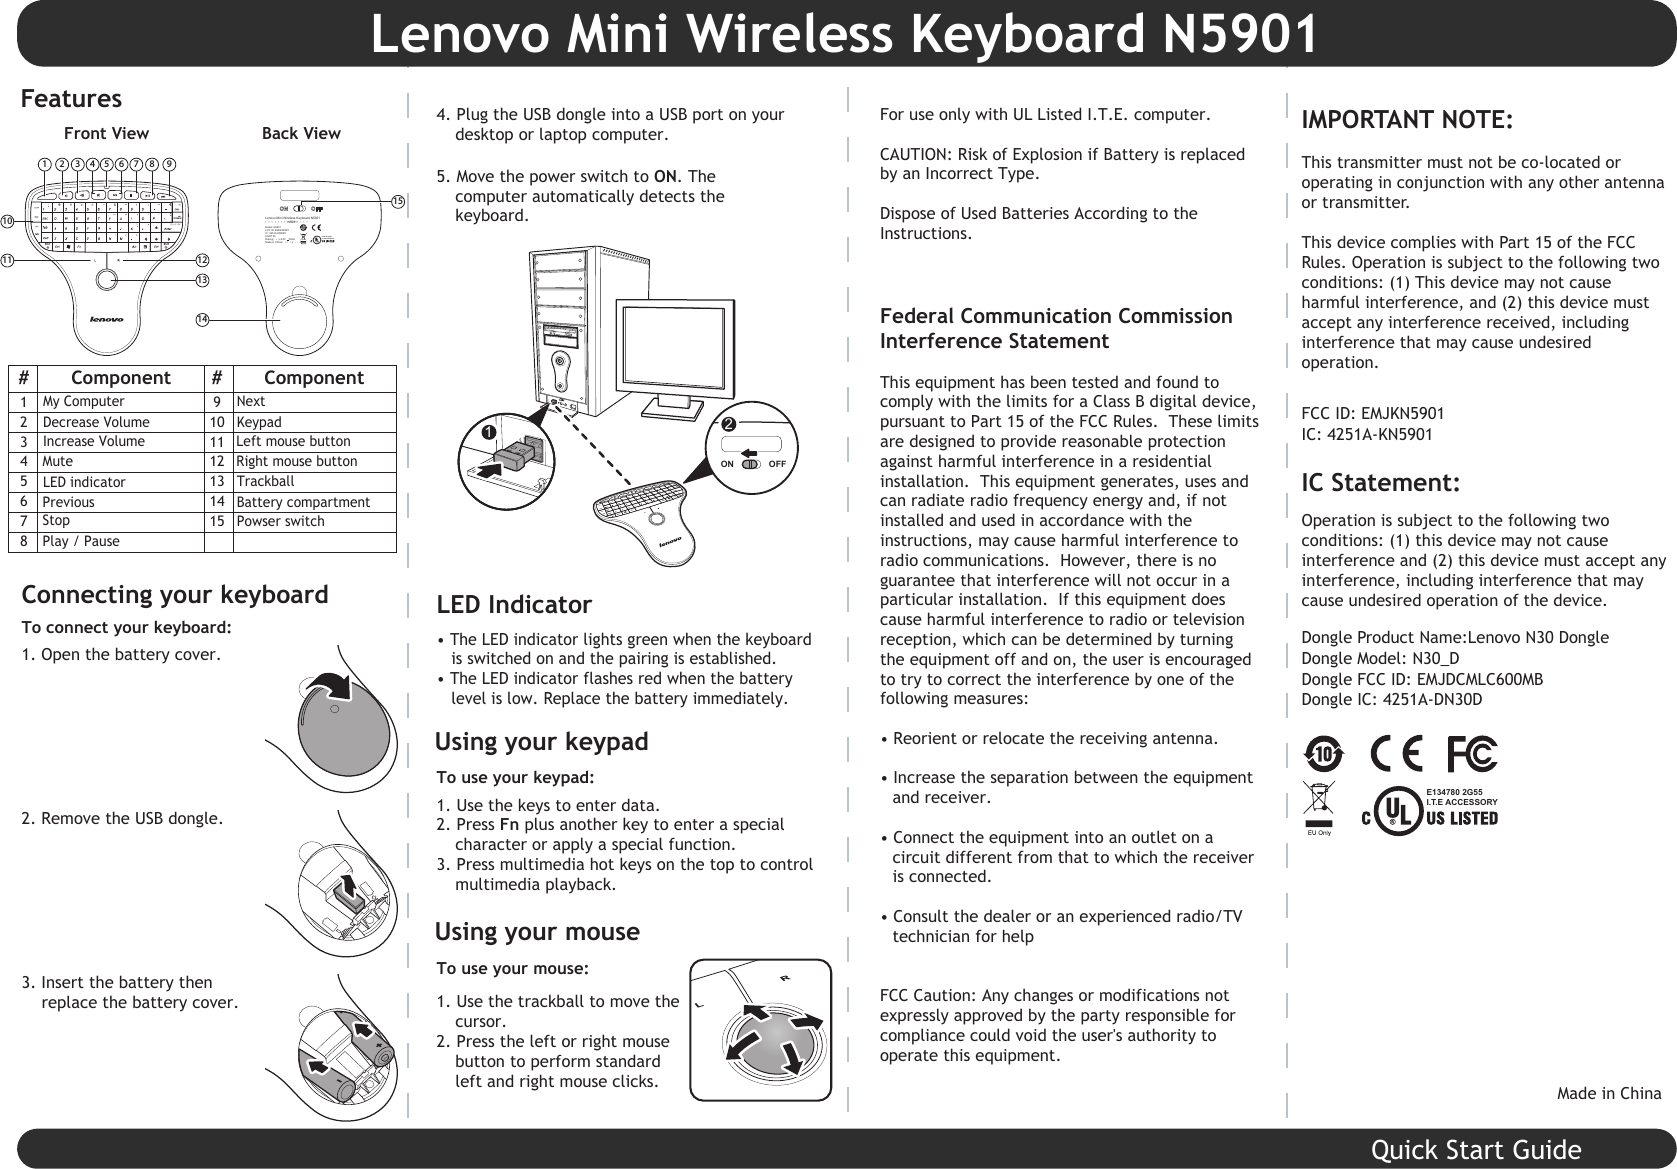 Quick Start Guide1311101412151 2 3 4 98765ON OFFON OFFON OFFLVT1ON OFF2E134780 2G55I.T.EACCESSORYLenovo Mini Wireless Keyboard N5901••••••••••••••N5901Model: N5901FCC ID: EMJKN5901IC: 4251A-KN5901CMIIT ID: Rating(••••): 3.0V    30mAMade in China(••••••••)FeaturesFront View Back ViewTo use your mouse:• The LED indicator lights green when the keyboard is switched on and the pairing is established.• The LED indicator flashes red when the battery    level is low. Replace the battery immediately.Using your mouseLED Indicator1. Use the trackball to move the cursor.2. Press the left or right mouse button to perform standard left and right mouse clicks.Connecting your keyboard1. Open the battery cover. 2. Remove the USB dongle. To connect your keyboard:4. Plug the USB dongle into a USB port on your desktop or laptop computer.For use only with UL Listed I.T.E. computer.CAUTION: Risk of Explosion if Battery is replaced by an Incorrect Type.Dispose of Used Batteries According to the Instructions.Federal Communication Commission Interference StatementThis equipment has been tested and found to comply with the limits for a Class B digital device, pursuant to Part 15 of the FCC Rules.  These limits are designed to provide reasonable protection against harmful interference in a residential installation.  This equipment generates, uses and can radiate radio frequency energy and, if not installed and used in accordance with the instructions, may cause harmful interference to radio communications.  However, there is no guarantee that interference will not occur in a particular installation.  If this equipment does cause harmful interference to radio or television reception, which can be determined by turning the equipment off and on, the user is encouraged to try to correct the interference by one of the following measures:•Reorient or relocate the receiving antenna.•Increase the separation between the equipment and receiver.•Connect the equipment into an outlet on a circuit different from that to which the receiver is connected.•Consult the dealer or an experienced radio/TV technician for helpFCC Caution: Any changes or modifications not expressly approved by the party responsible for compliance could void the user&apos;s authority to operate this equipment.5. Move the power switch to ON. The computer automatically detects the keyboard.3. Insert the battery then     replace the battery cover.#12345678ComponentLeft mouse buttonRight mouse buttonMutePrevious#9101112131415ComponentTrackballLED indicatorBattery compartmentPowser switchLenovo Mini Wireless Keyboard N5901Quick Start GuideMy ComputerDecrease VolumeIncrease VolumeKeypadStopPlay / PauseNextUsing your keypadTo use your keypad:1. Use the keys to enter data. 2. Press Fn plus another key to enter a special character or apply a special function. 3. Press multimedia hot keys on the top to control multimedia playback.IMPORTANT NOTE:This transmitter must not be co-located or operating in conjunction with any other antenna or transmitter.This device complies with Part 15 of the FCC Rules. Operation is subject to the following two conditions: (1) This device may not cause harmful interference, and (2) this device must accept any interference received, including interference that may cause undesired operation.FCC ID: EMJKN5901IC: 4251A-KN5901IC Statement:Operation is subject to the following two conditions: (1) this device may not cause interference and (2) this device must accept any interference, including interference that may cause undesired operation of the device.Dongle Product Name:Lenovo N30 DongleDongle Model: N30_DDongle FCC ID: EMJDCMLC600MBDongle IC: 4251A-DN30DMade in ChinaE134780 2G55I.T.E ACCESSORY